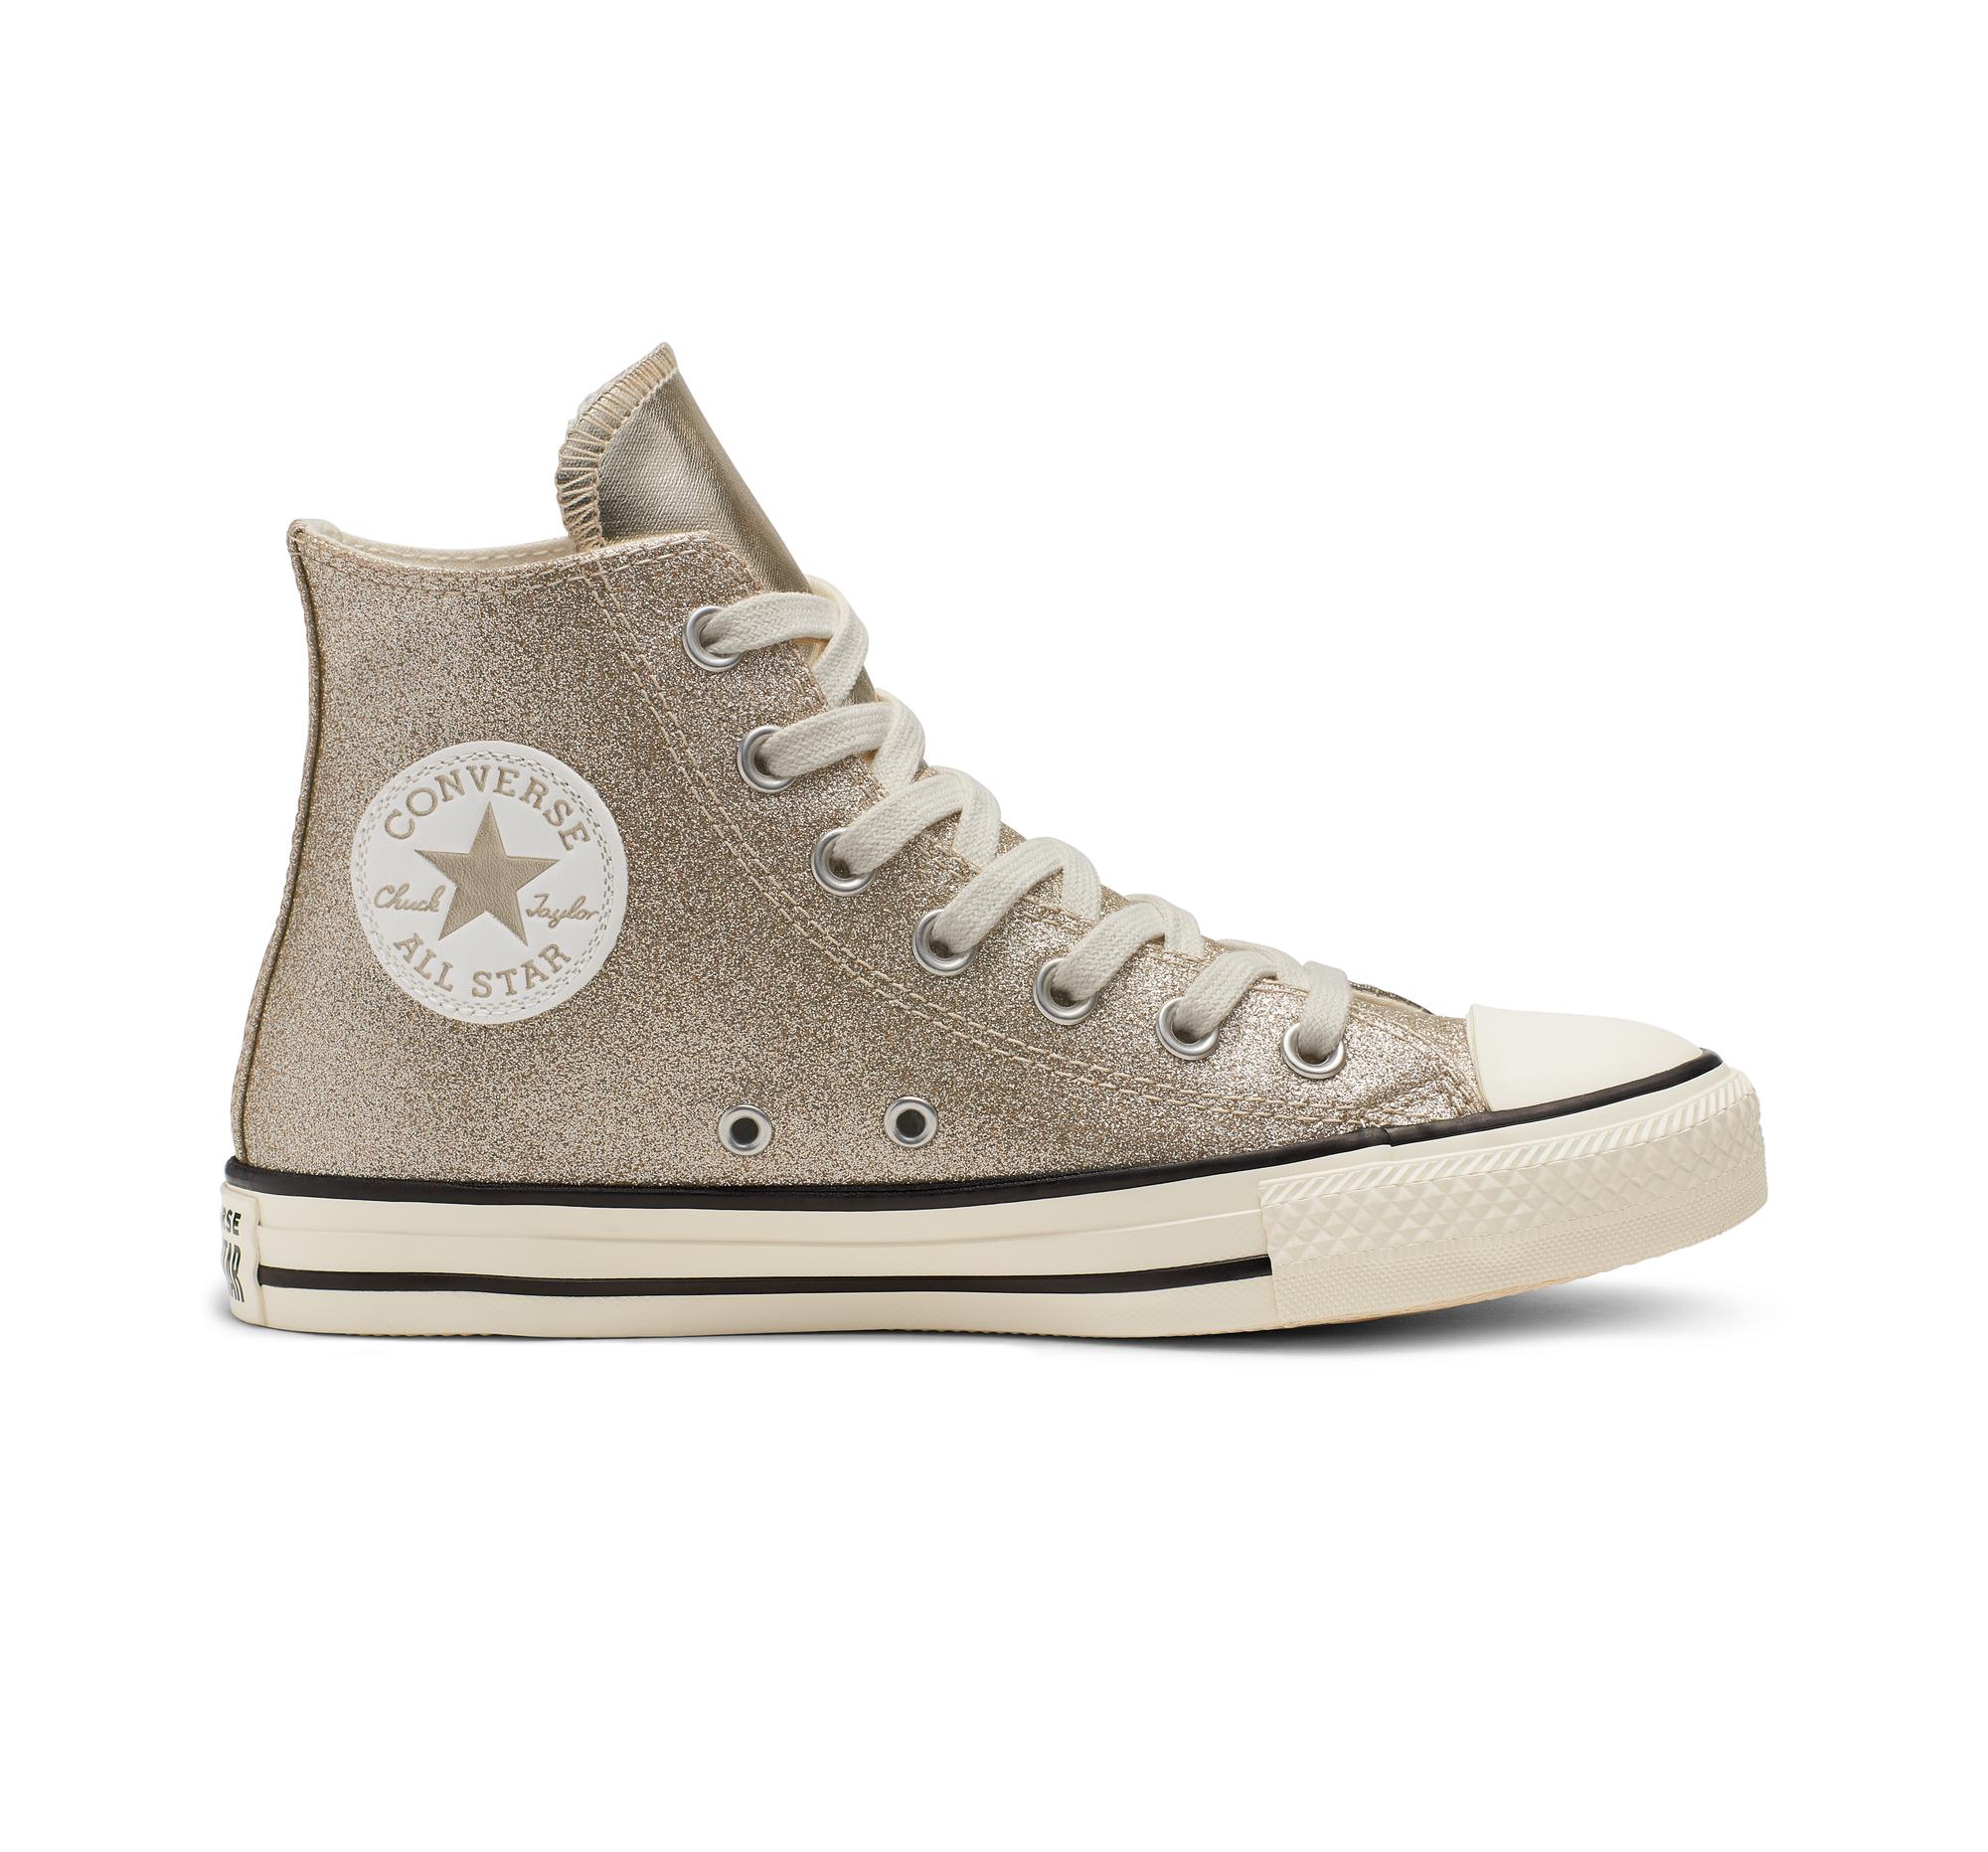 Converse Synthetic Chuck Taylor All Star Shiny Metal High Top in Gold  (Metallic) | Lyst